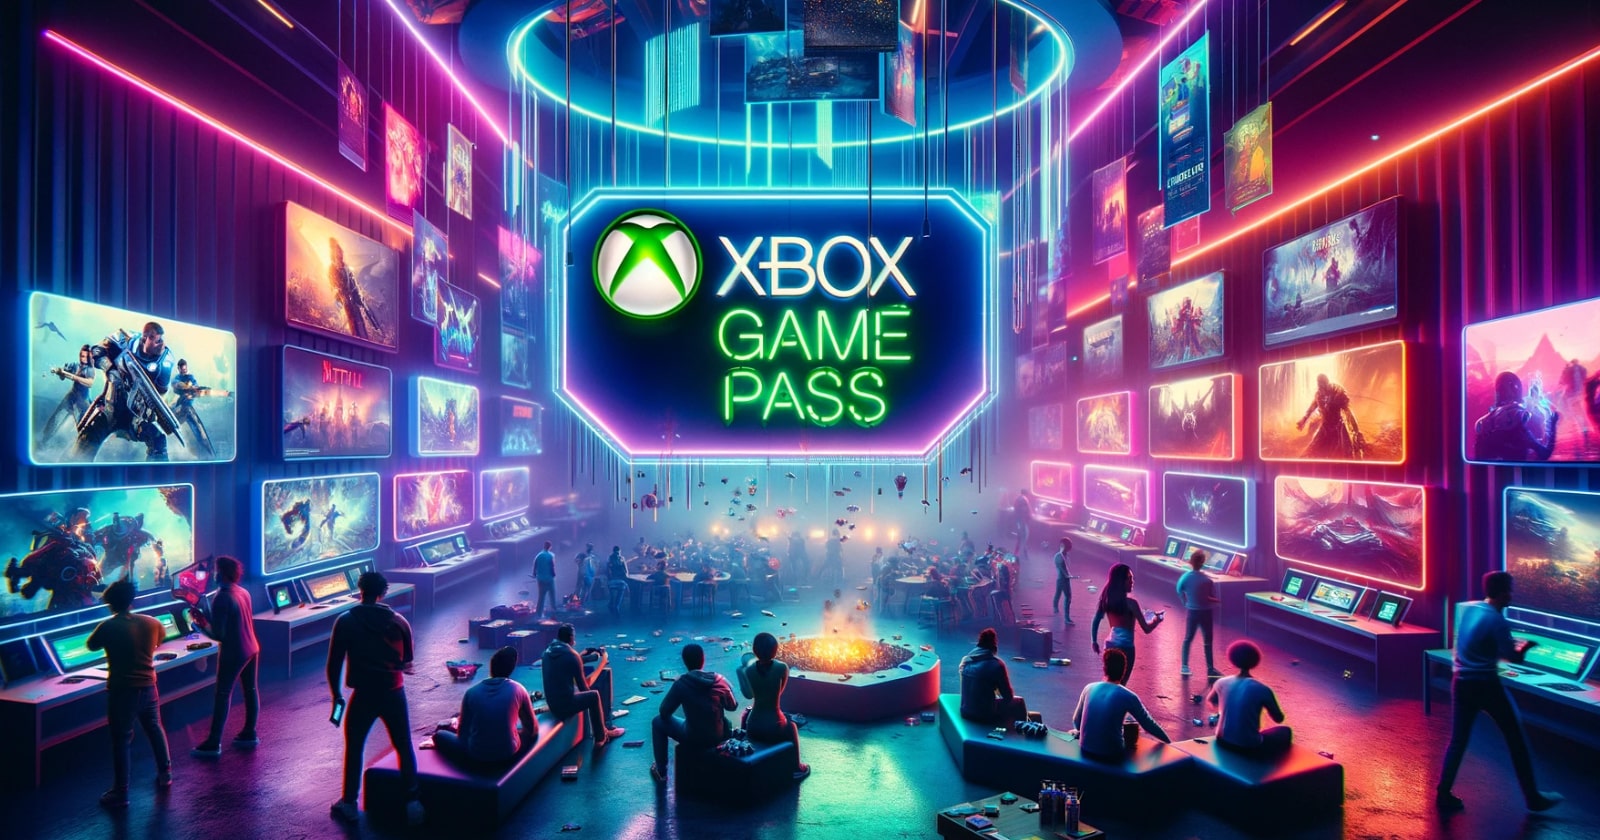 Microsoft makes a lot of money! Xbox Game Pass subscription numbers revealed